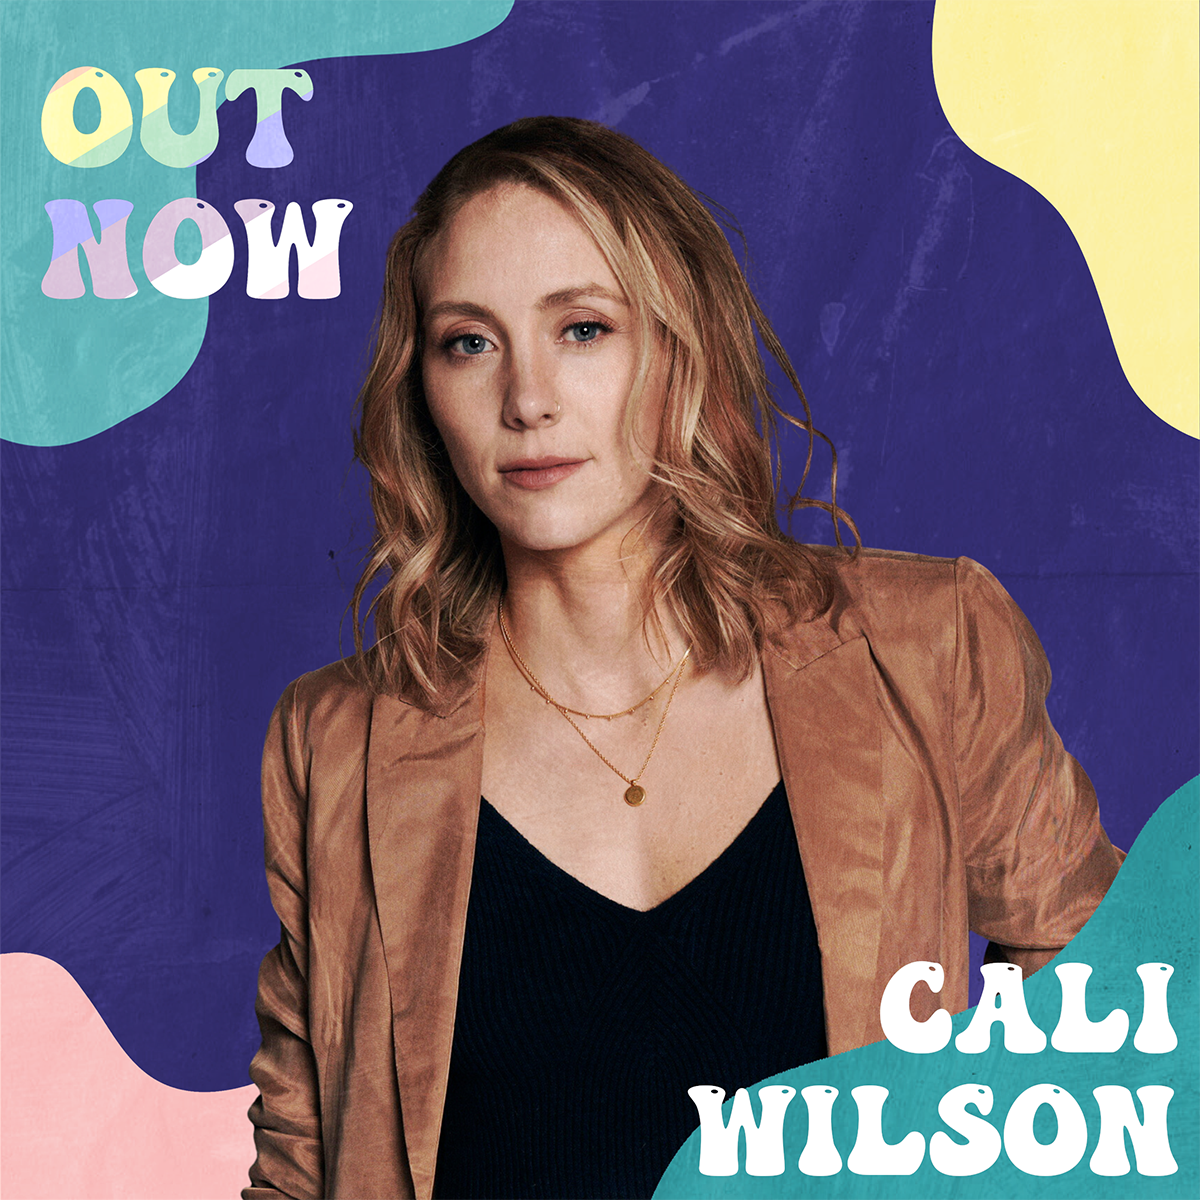 Out Now: Cali Wilson